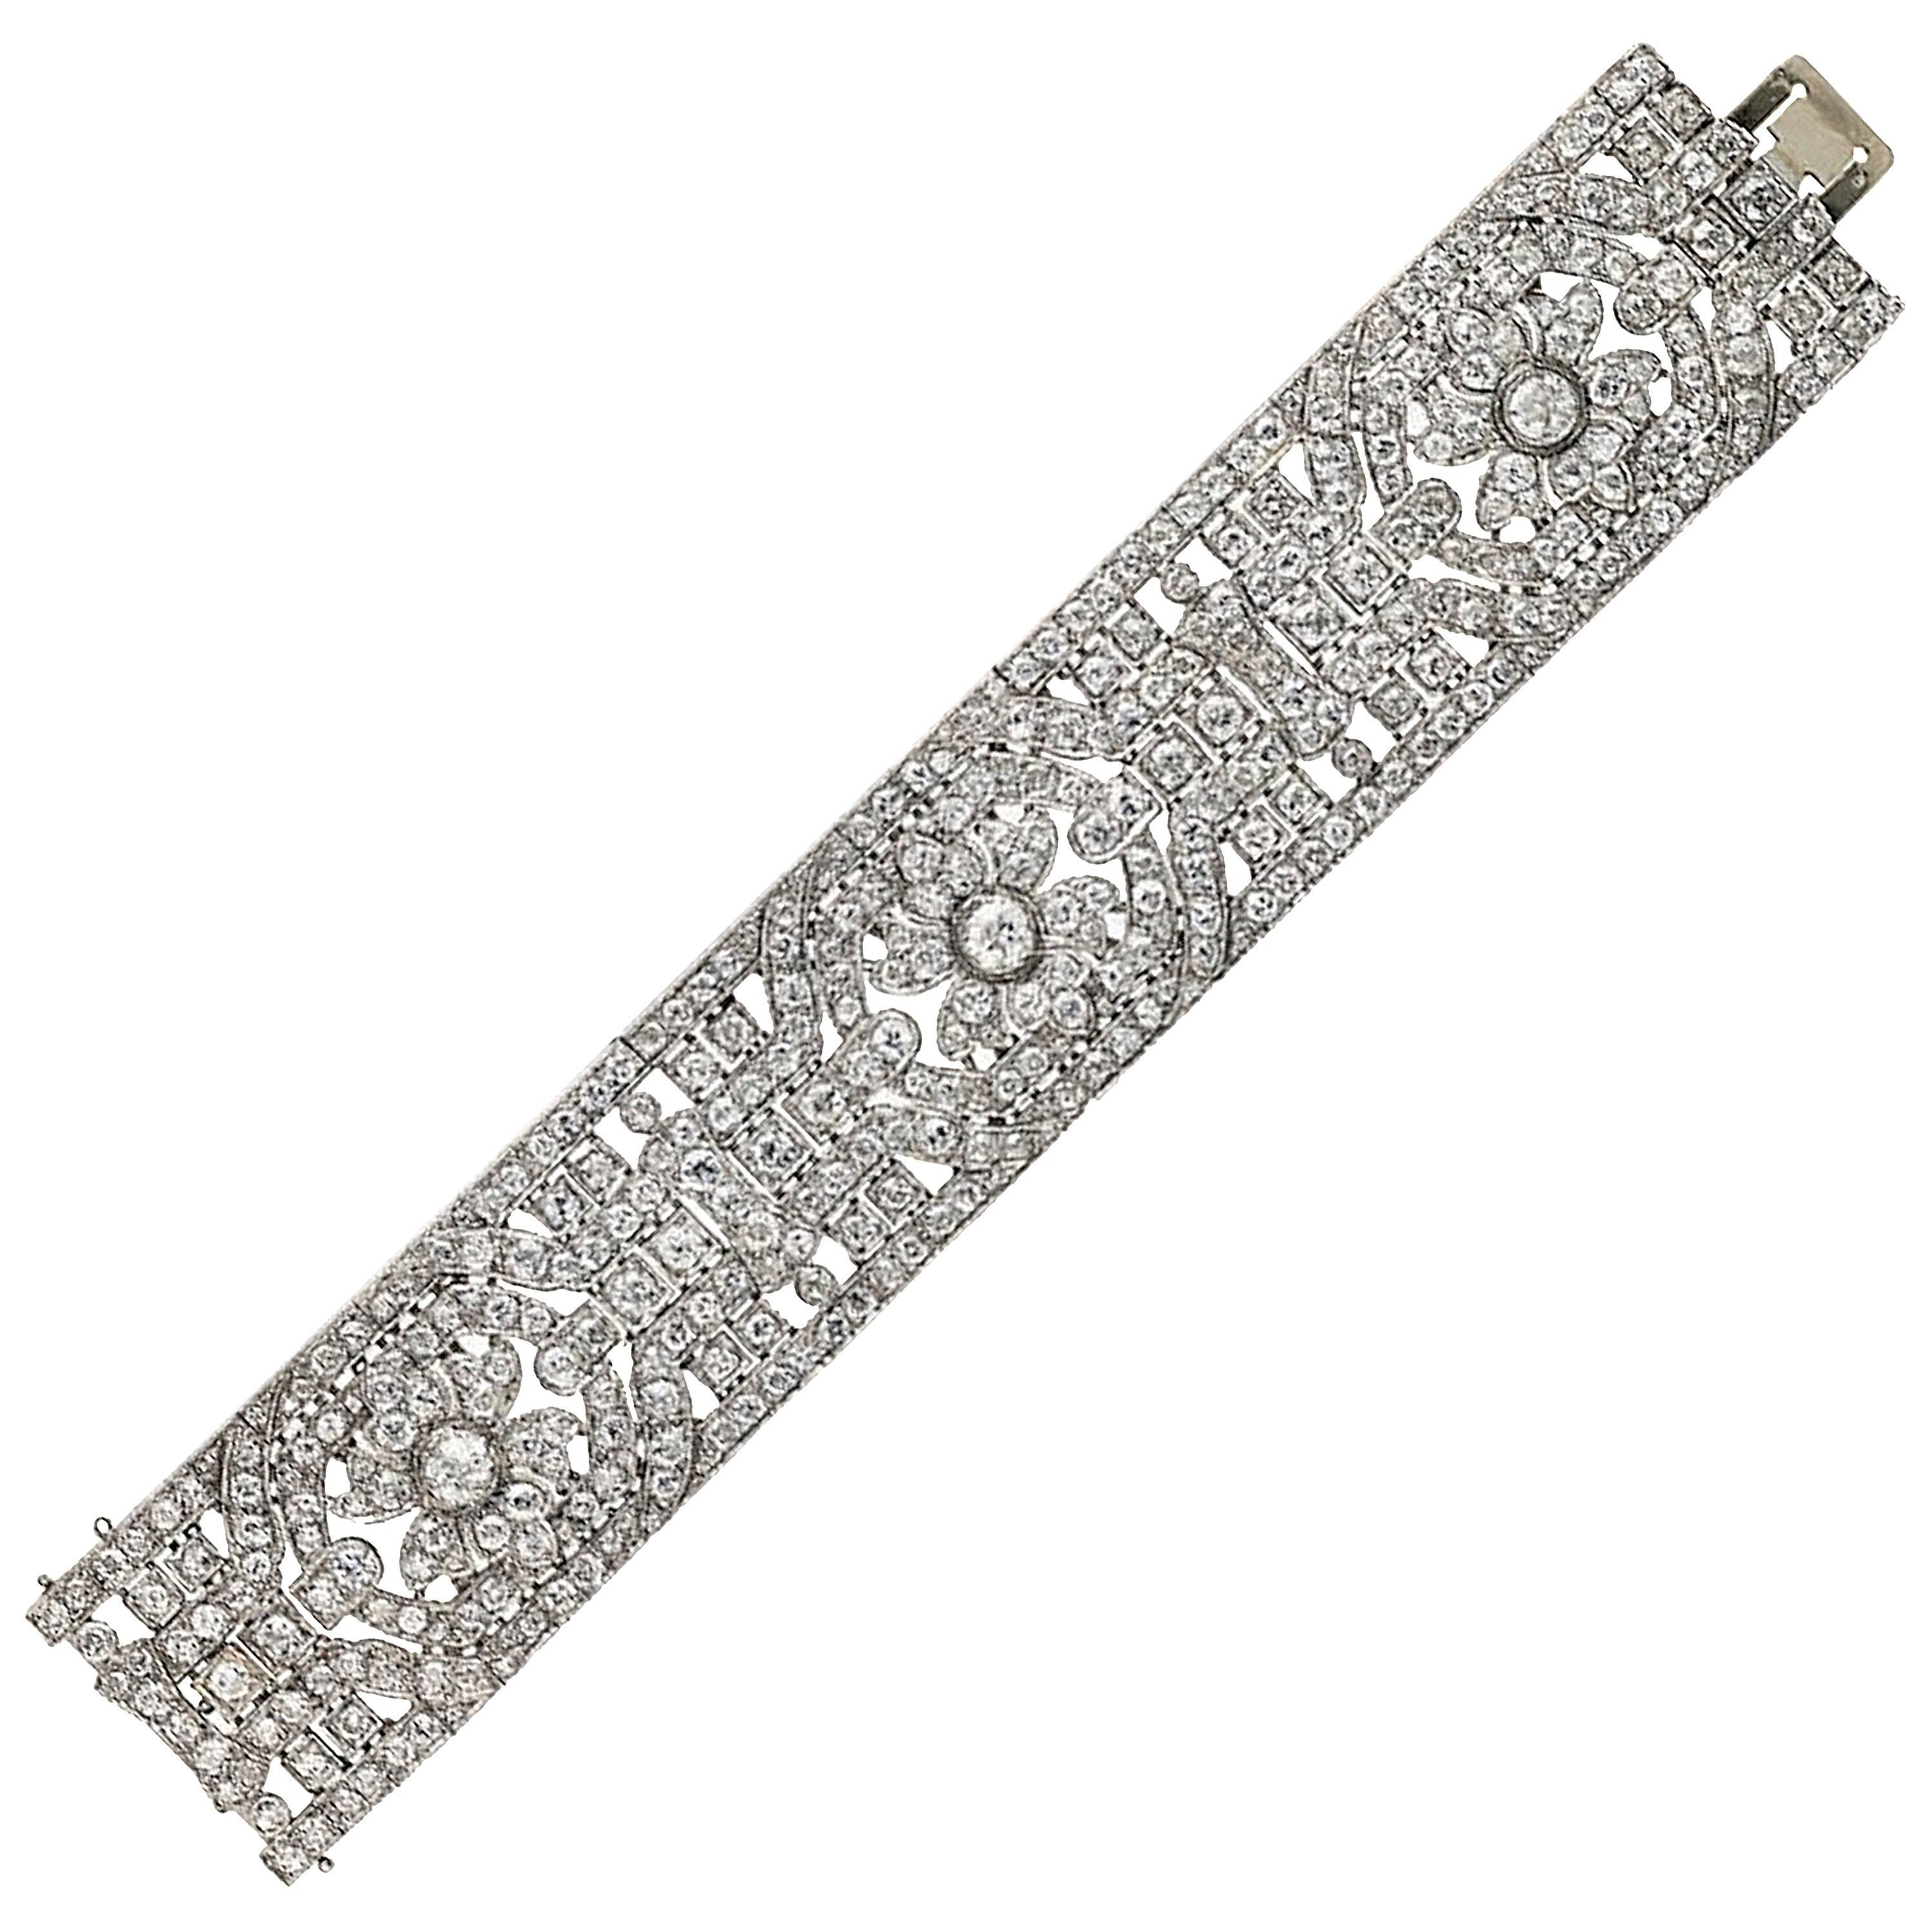 French Art Deco Diamond Platinum Bracelet.
Of openwork geometric design, centering three flowerheads, set throughout with old and single-cut diamonds. 
French assay marks for platinum and gold.
Total diamond: approximately 40.00 carats 
Length: 7.24